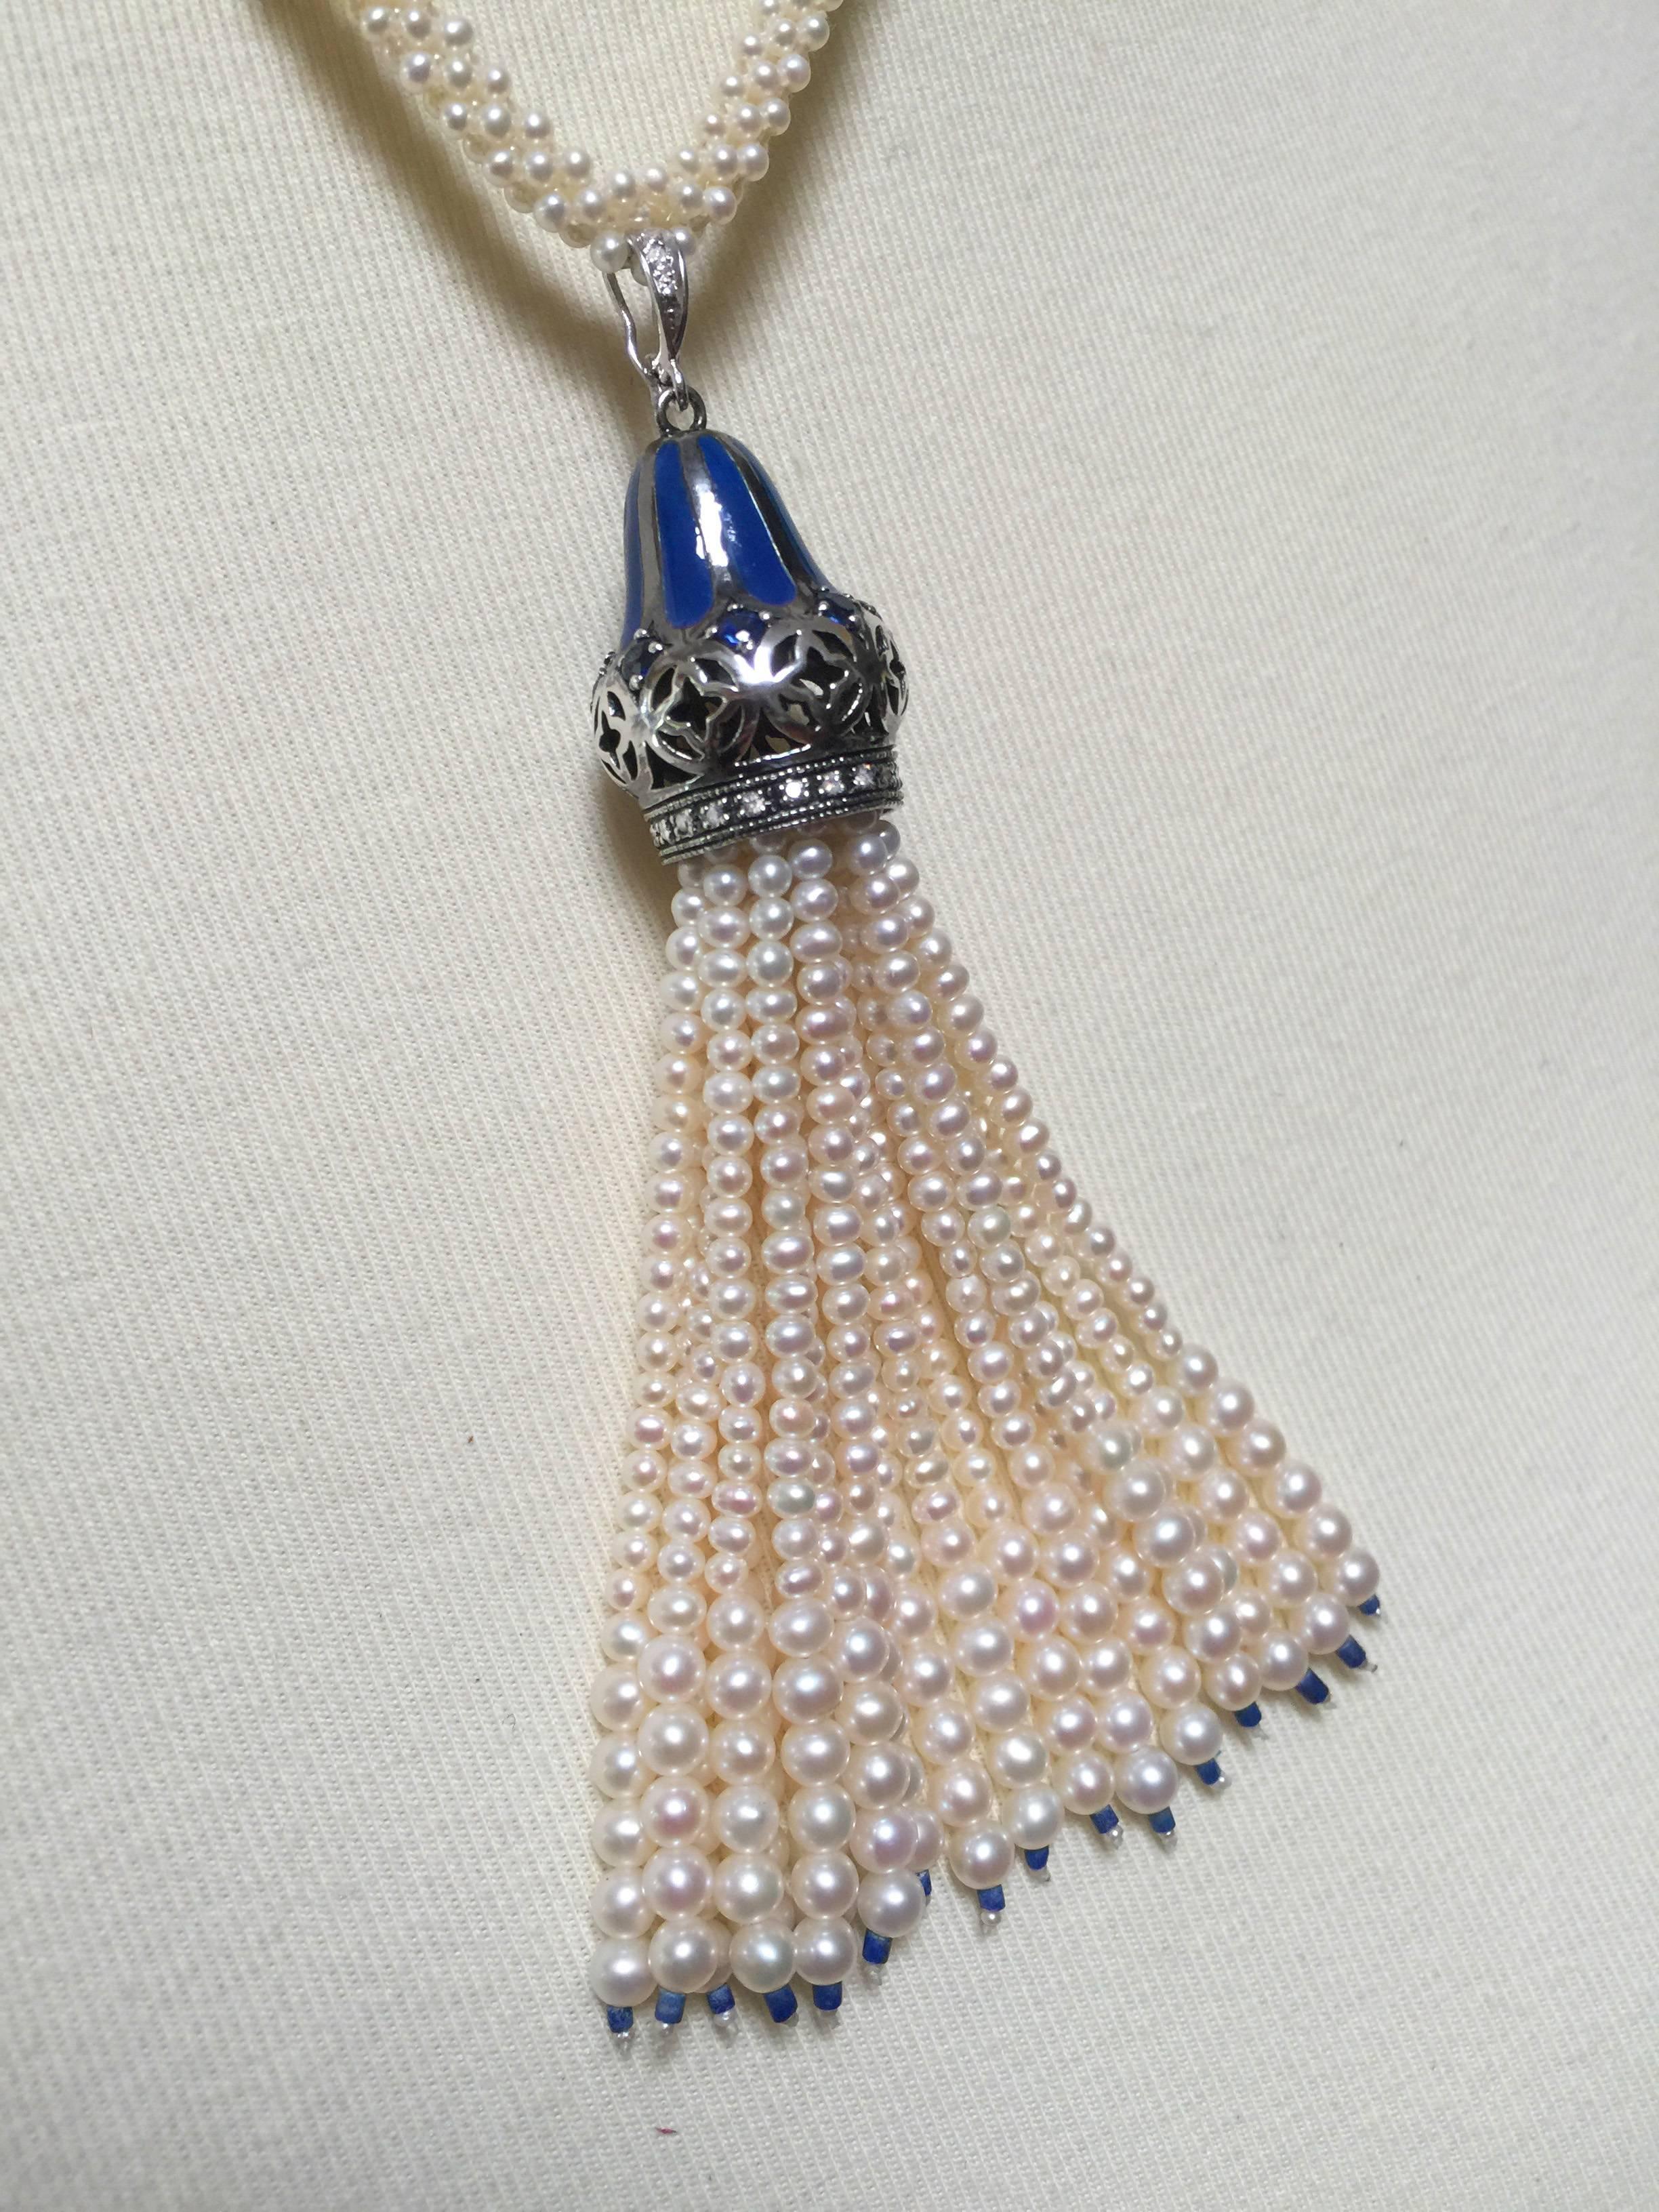 Woven into a rope-style lariat necklace with pearls and lapis-lazuli beads, this one-of-a-kind handmade piece may be worn with or without tassel, allowing for different shapes and style choices. The tassel starts with a sterling silver with a